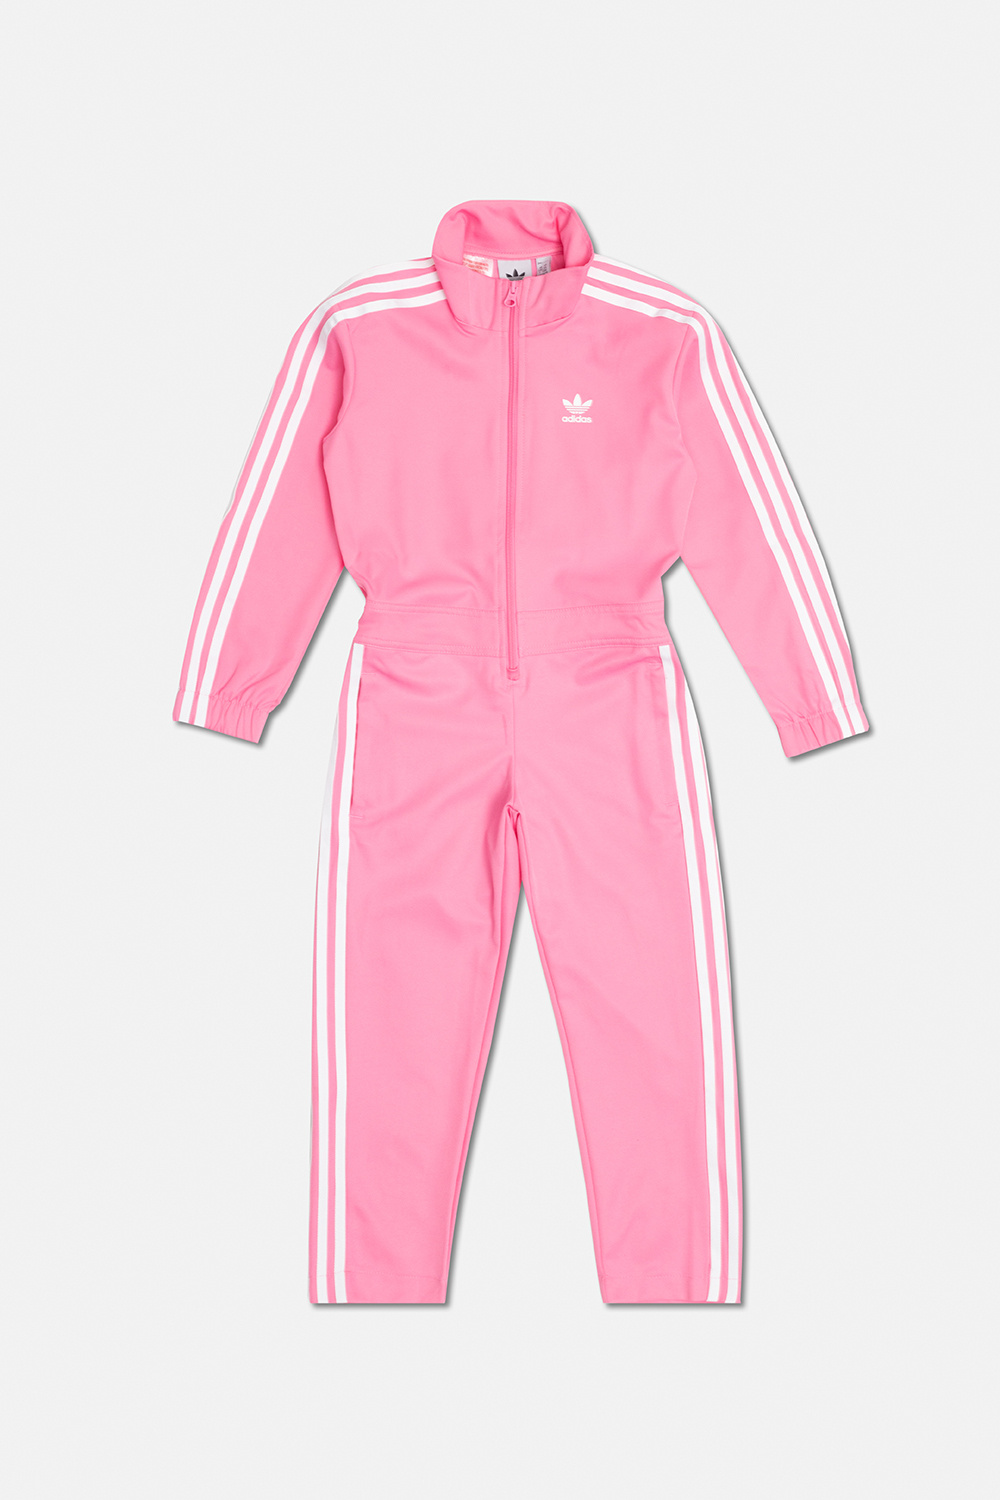 Moss except for Sovereign StclaircomoShops | adidas swimming costumes for adults | 14 years) - Kids's  Girls clothes (4 | ADIDAS Kids adidas fitfoam slippers sandals sale 2016